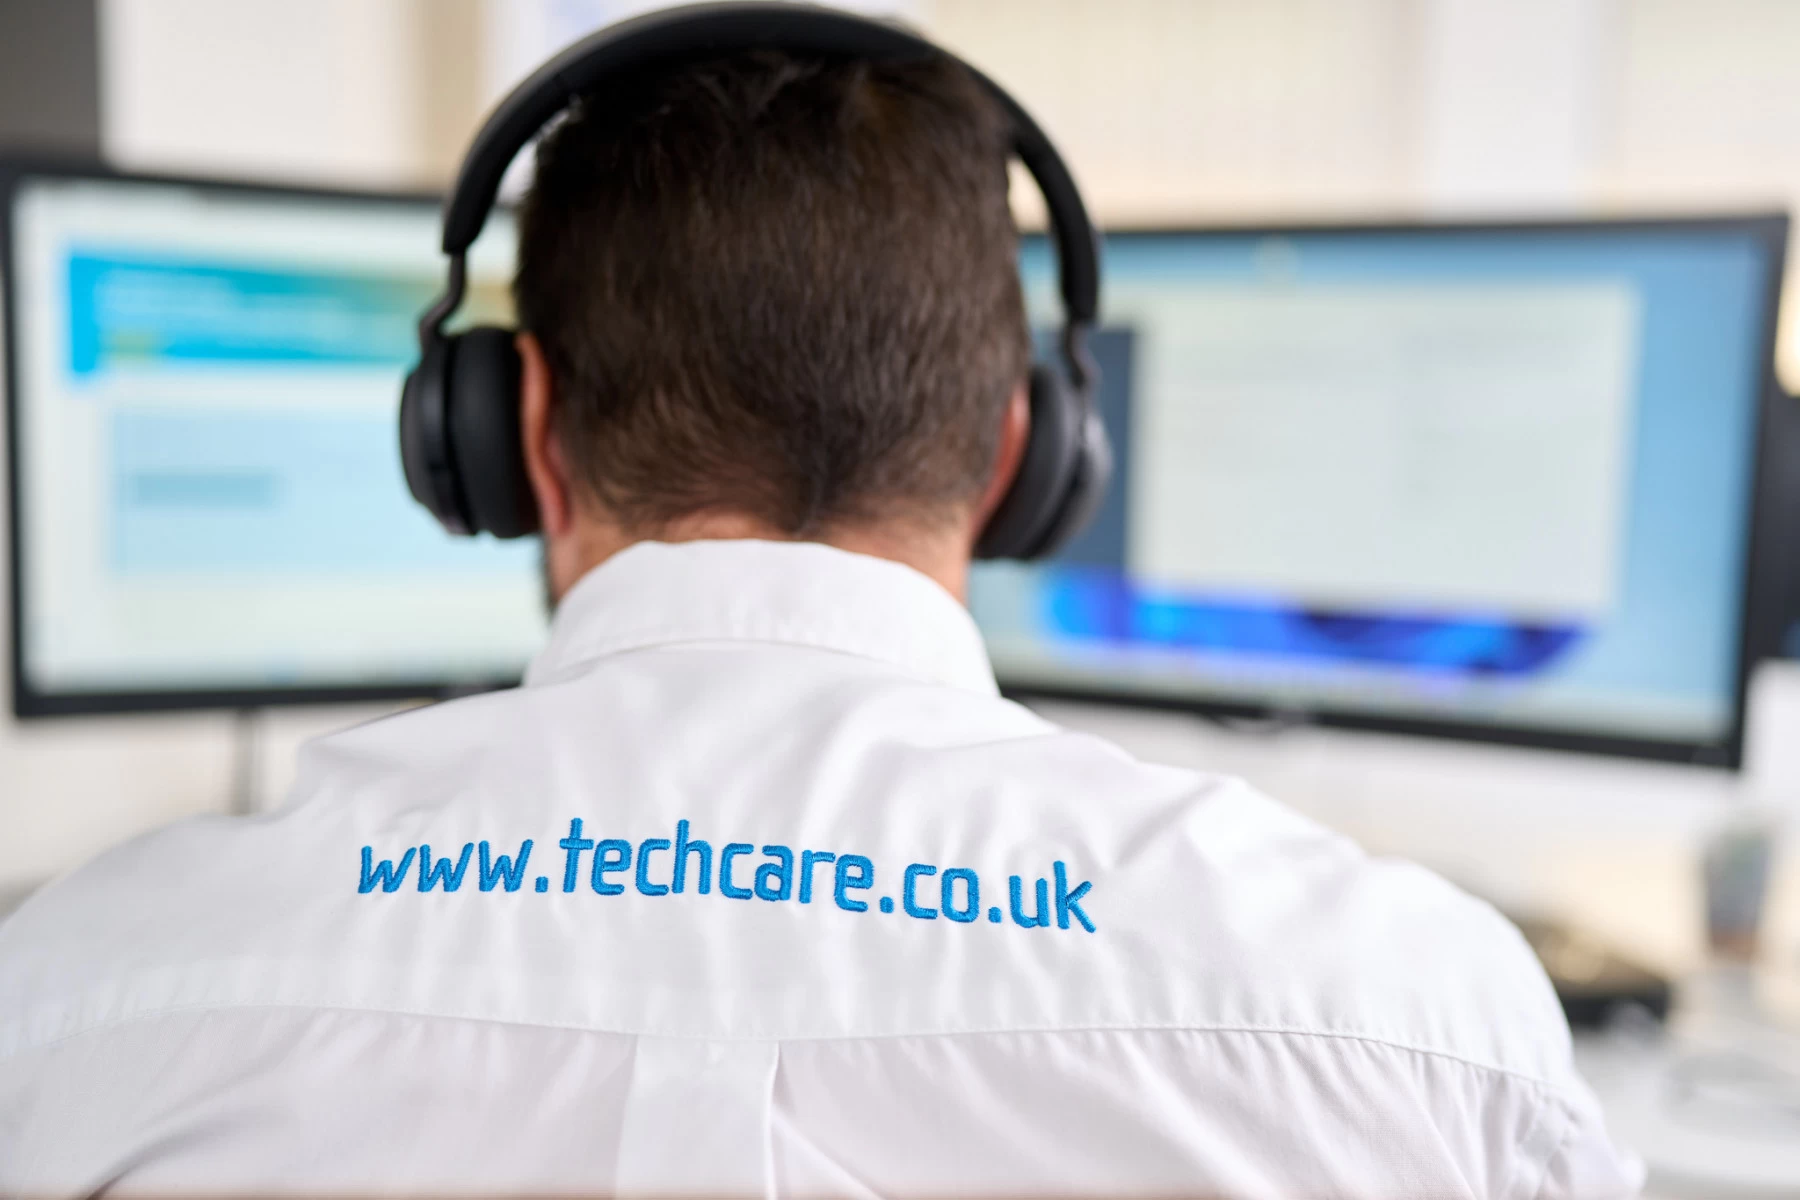 Rob IT Support Techcare